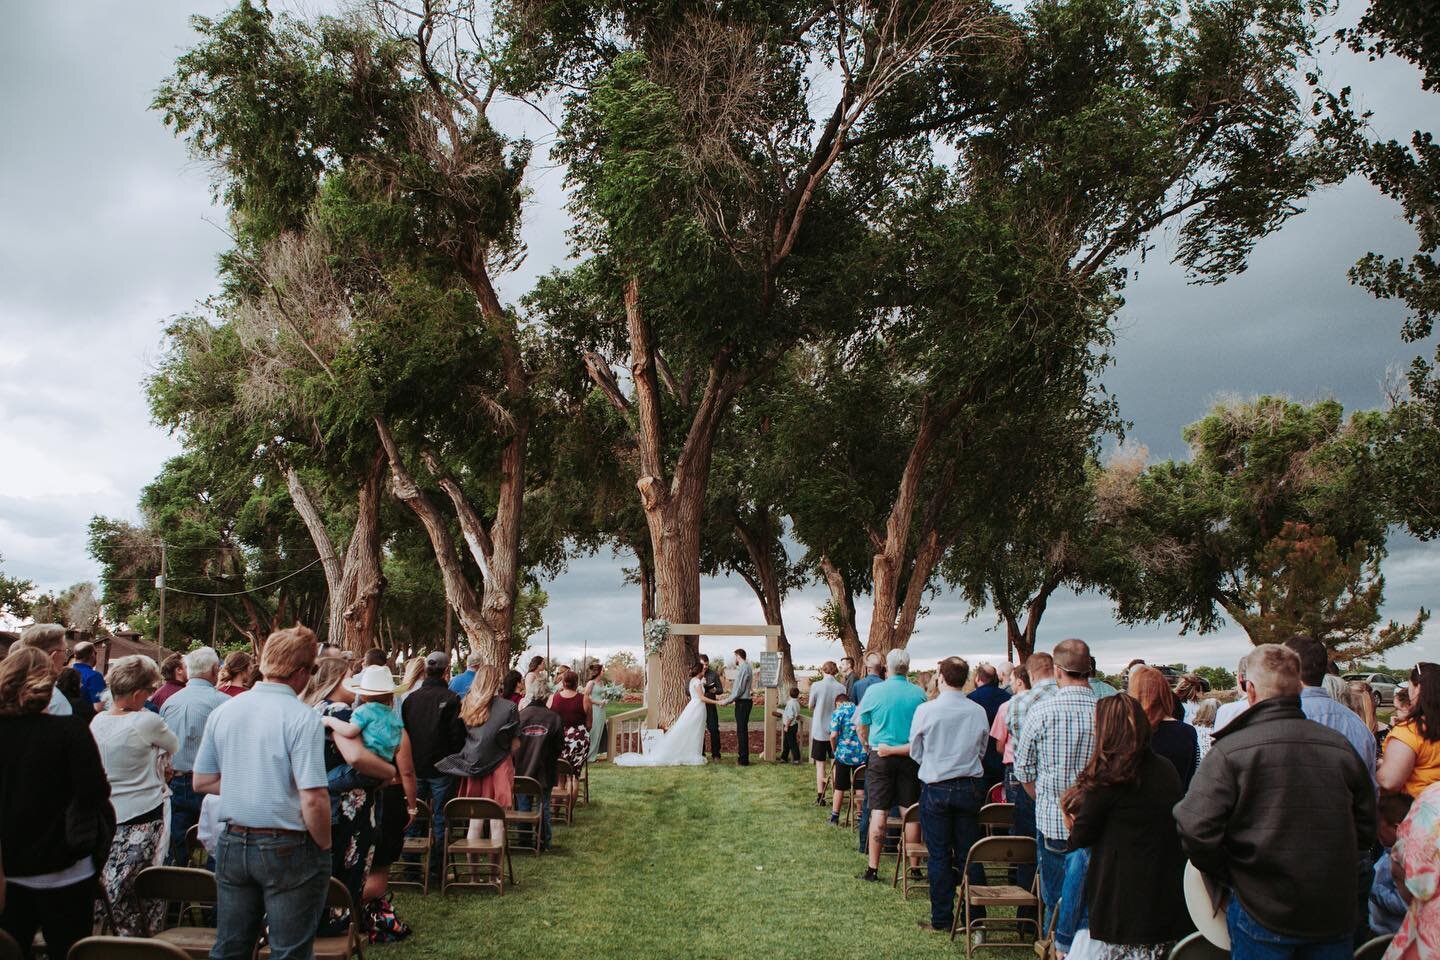 Can you believe this was a backyard wedding? Those trees! 😍